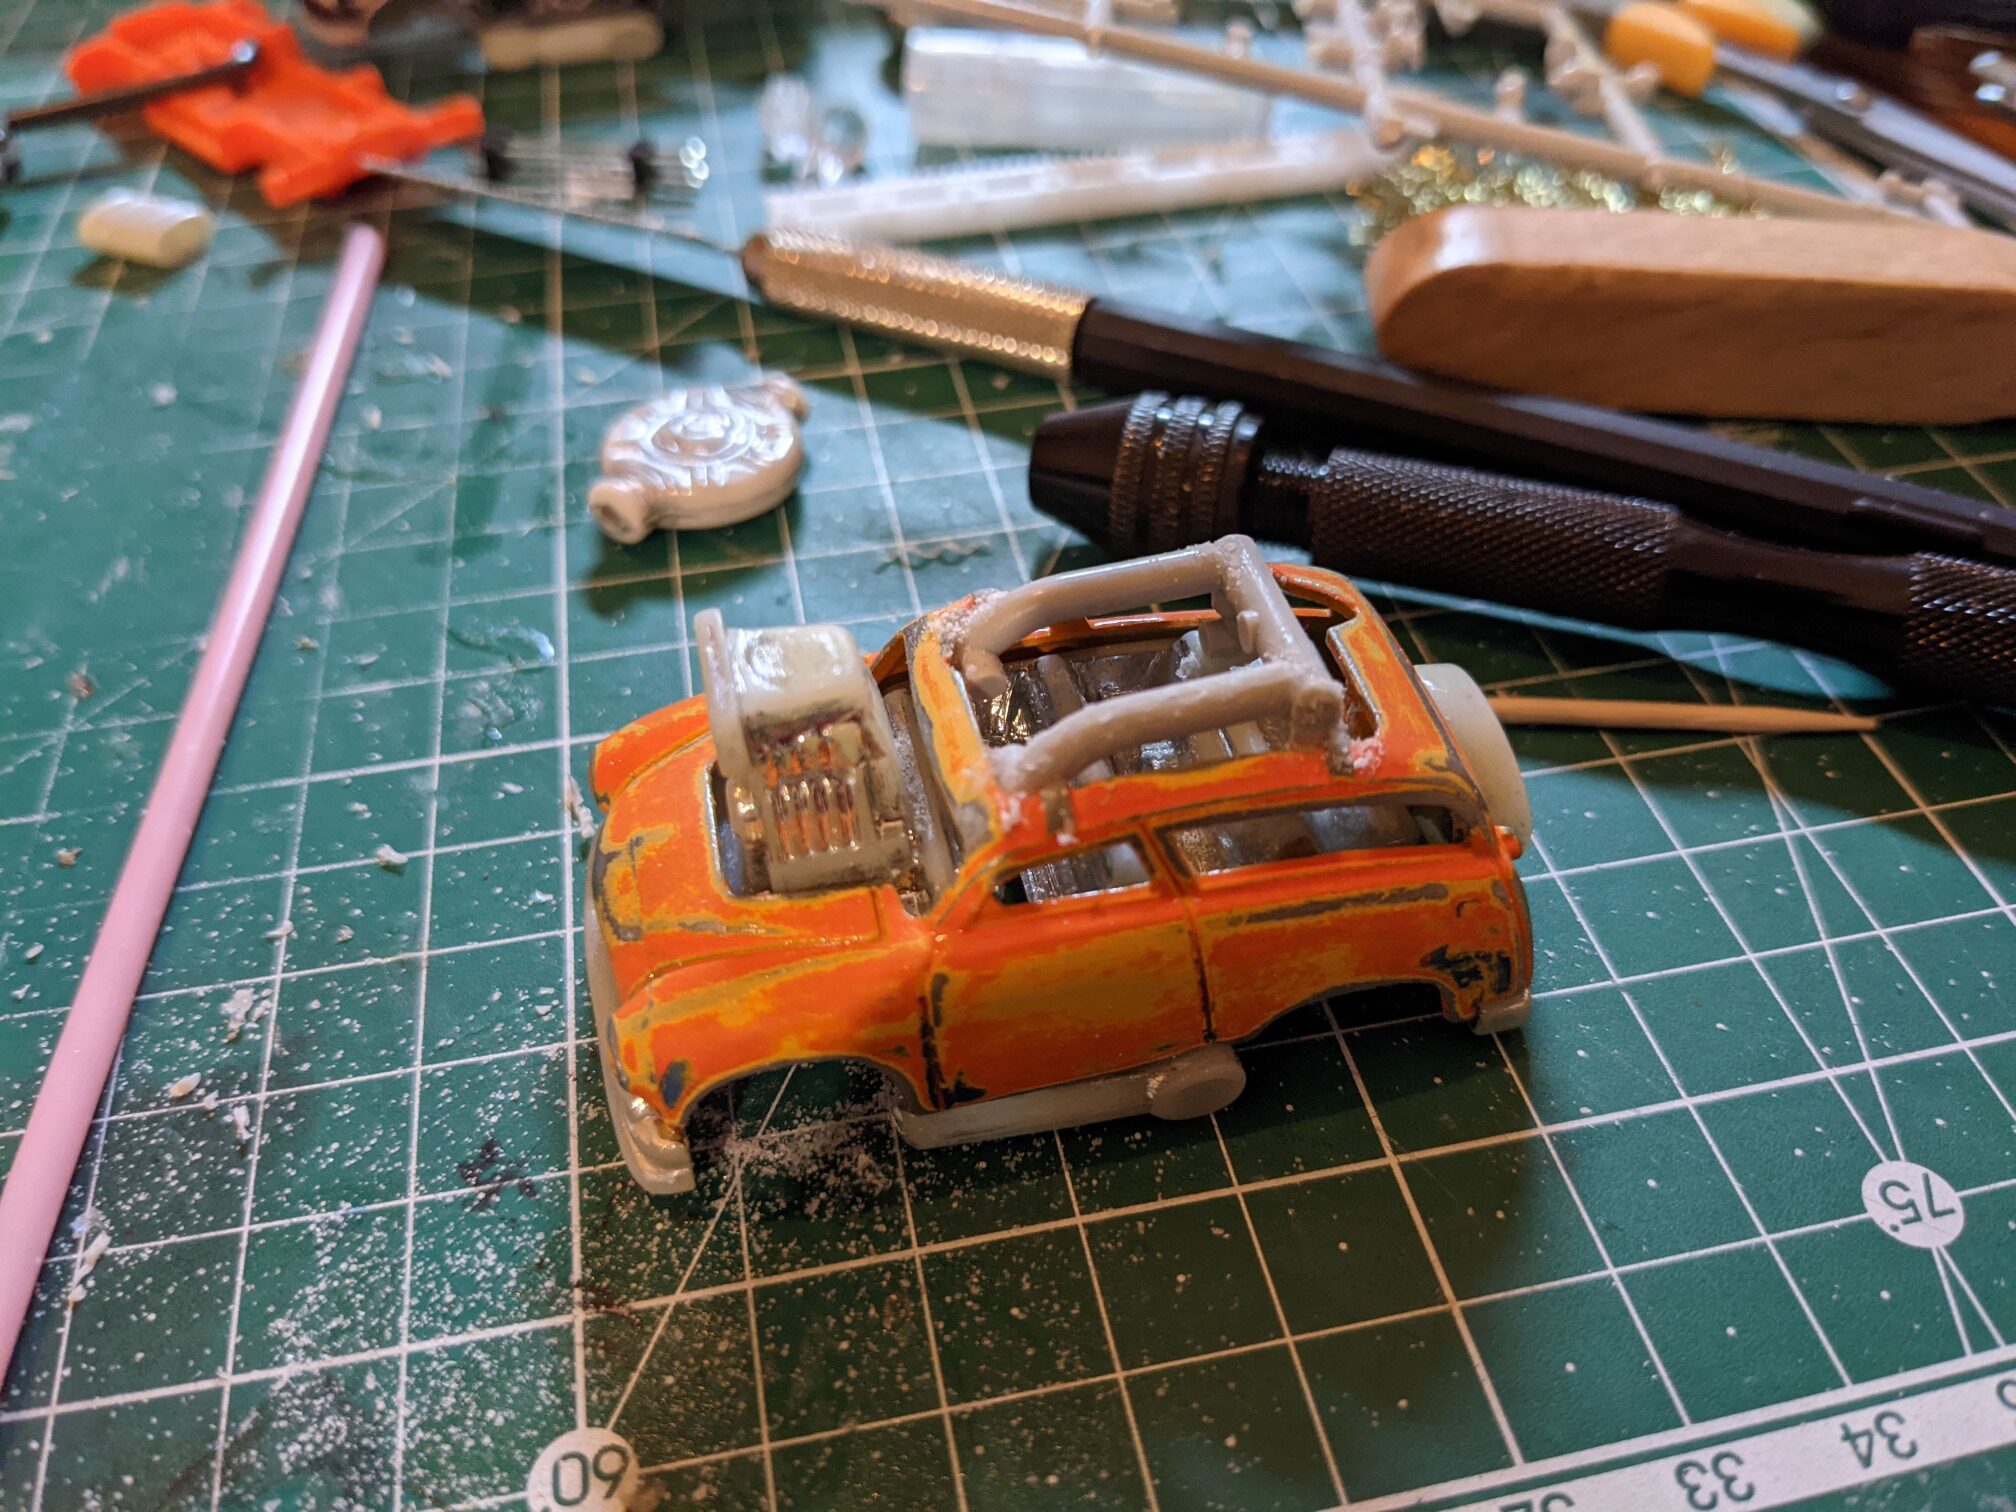 I took the car apart. Sanded the paint a bit, removed the transparent part and started adding some details.